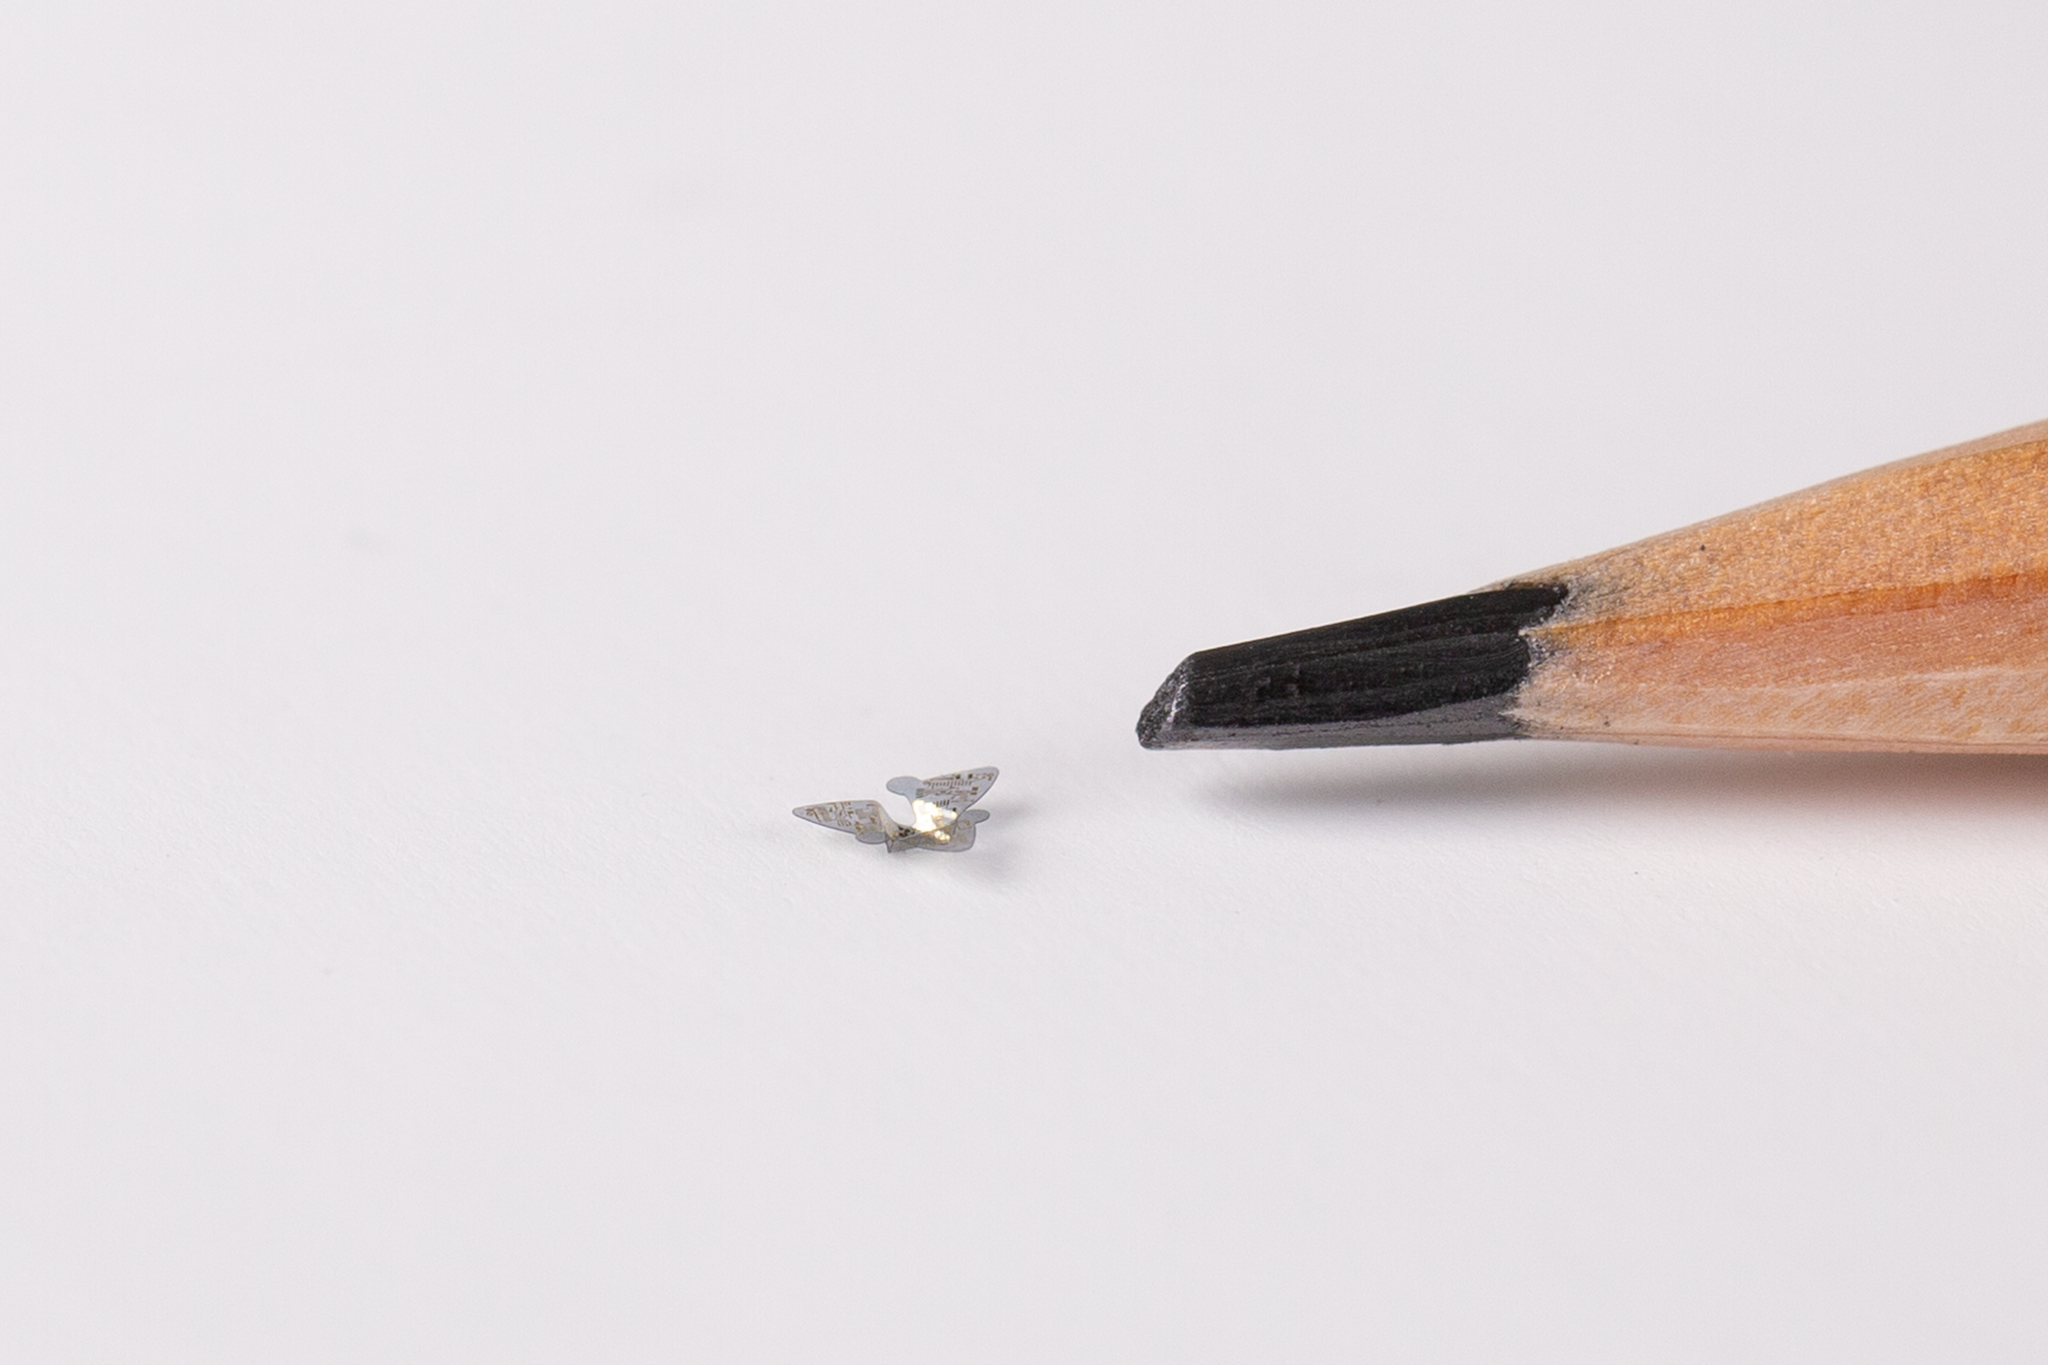 A microflier next to a pencil tip